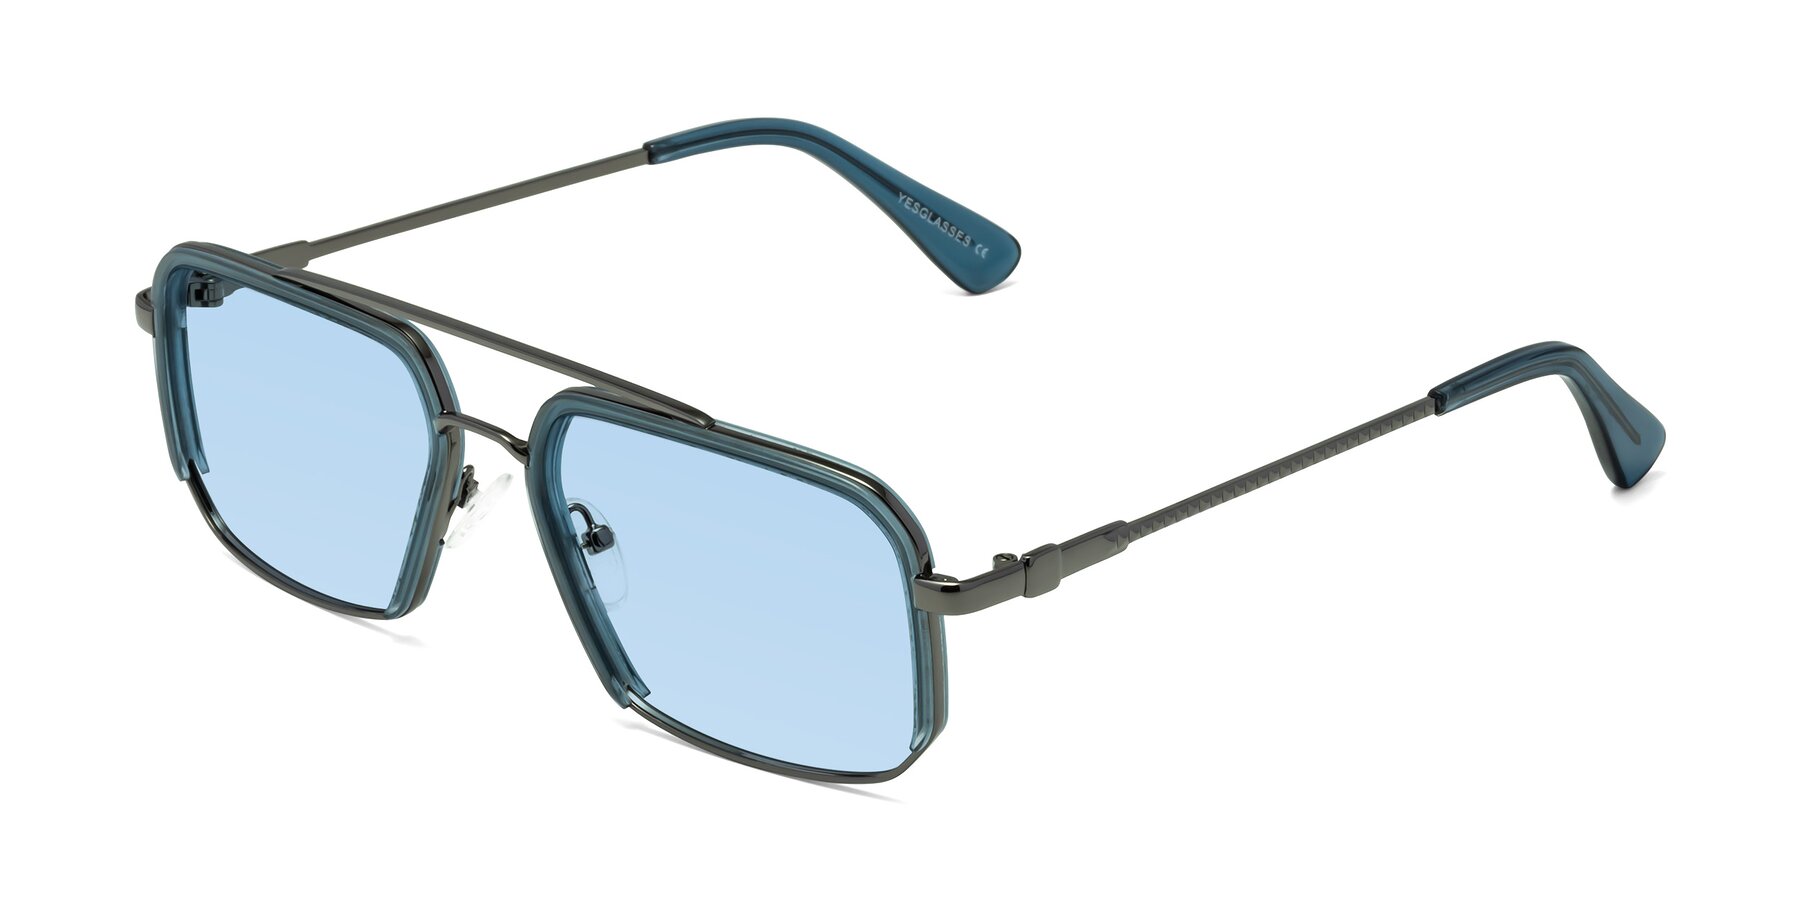 Angle of Dechter in Teal-Gunmetal with Light Blue Tinted Lenses